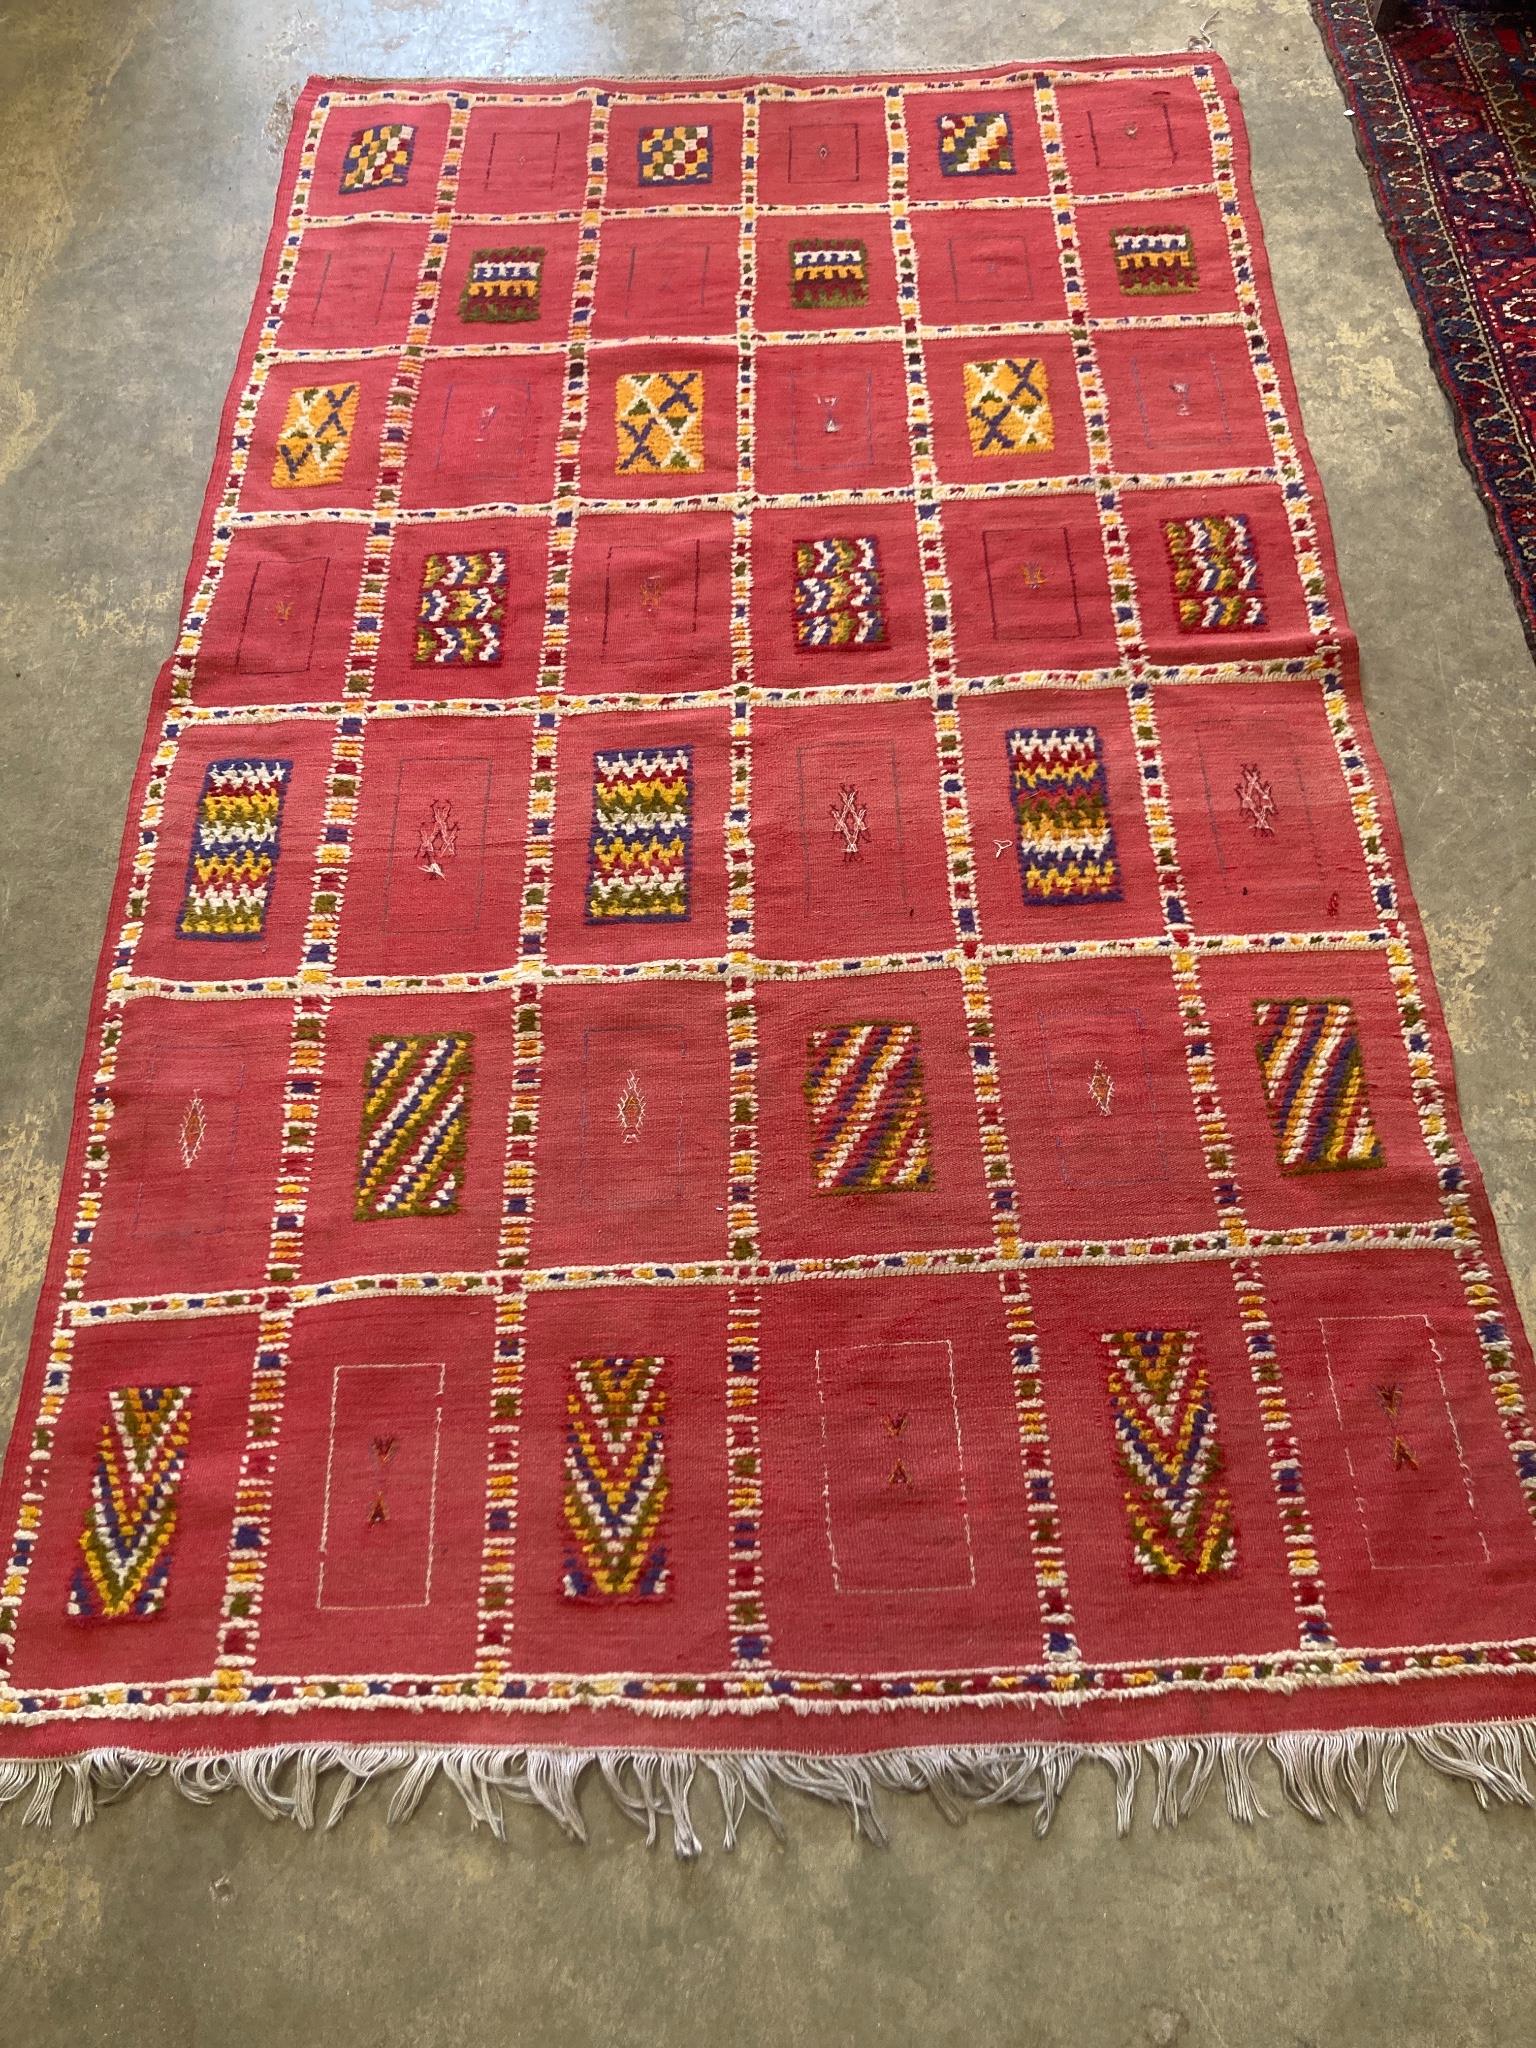 A Moroccan red ground rug